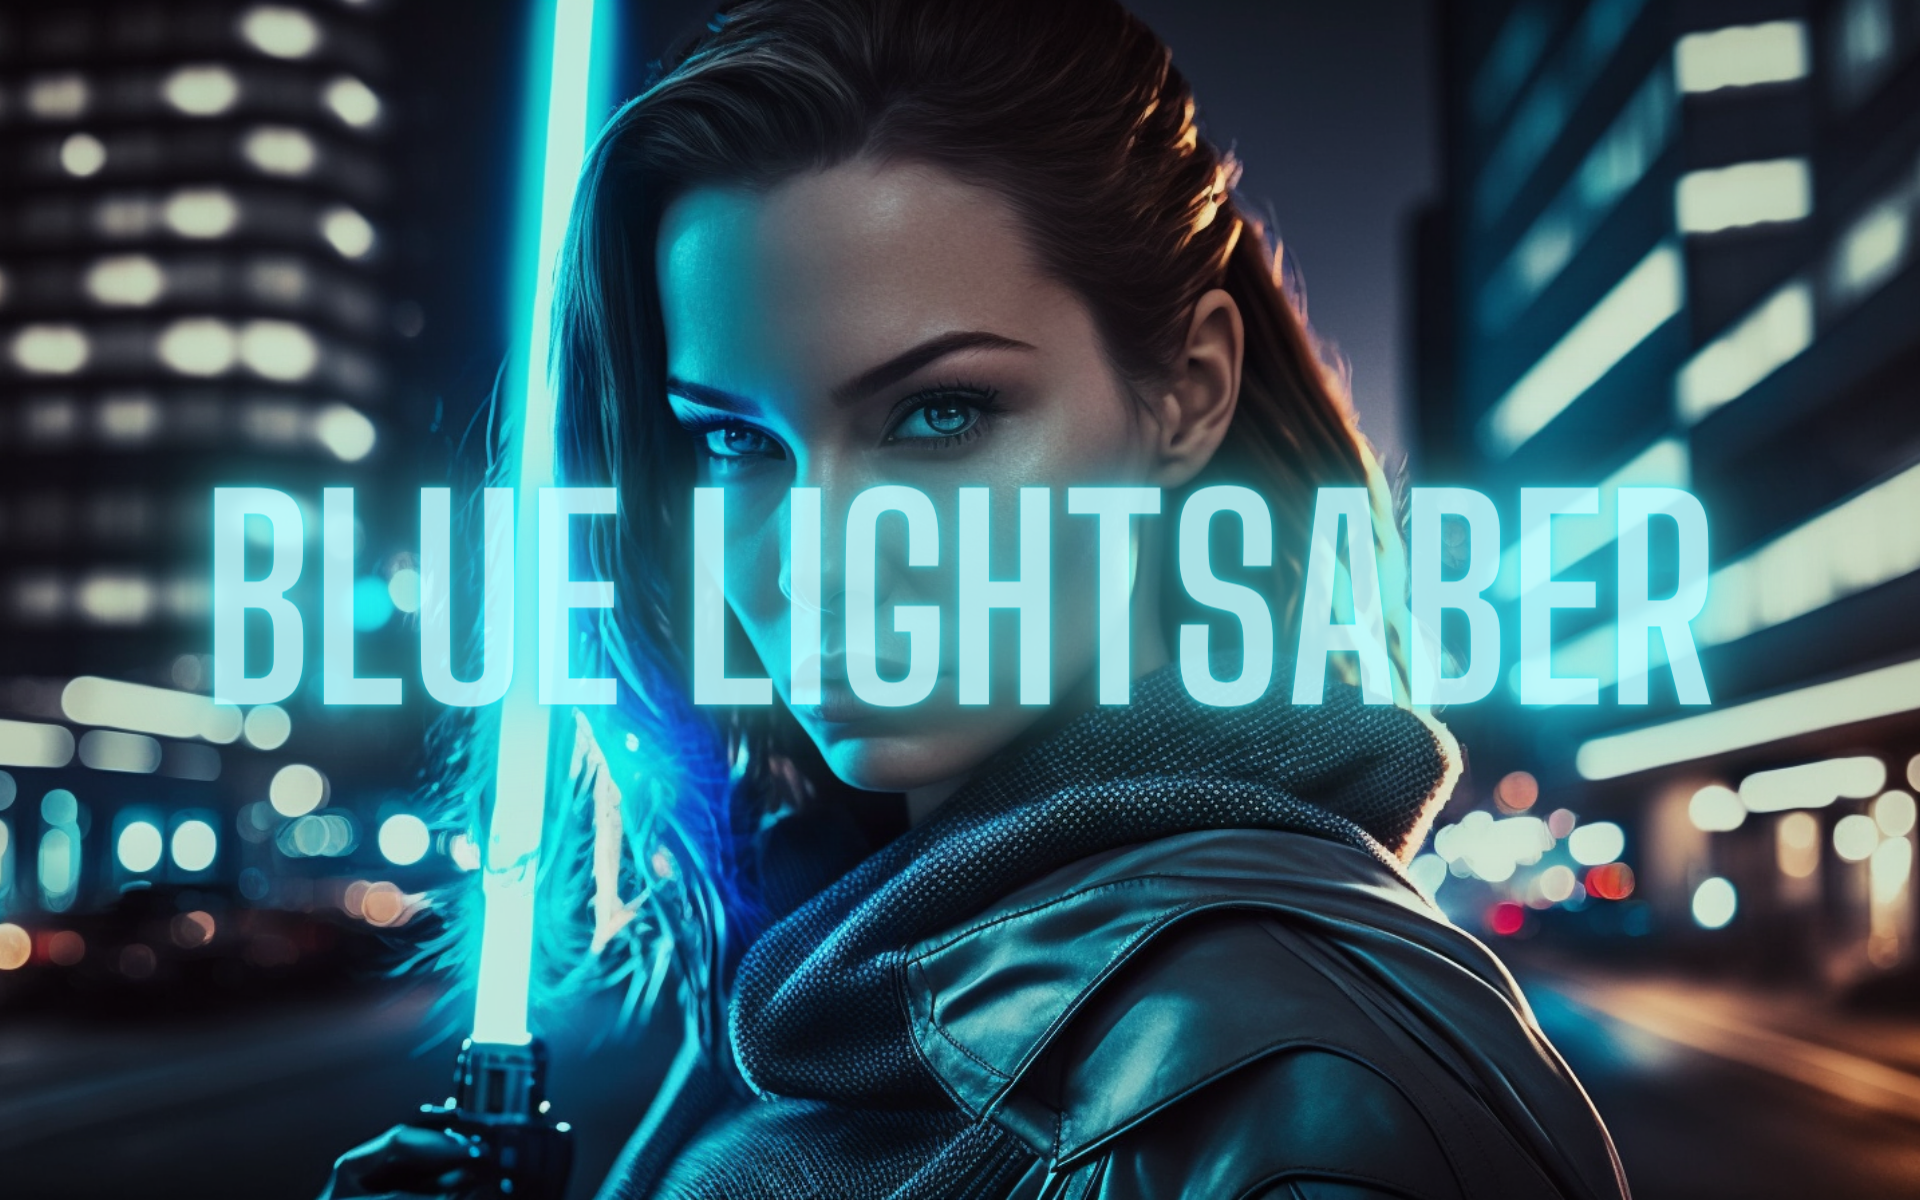 Who Has a Blue Lightsaber in Star Wars?